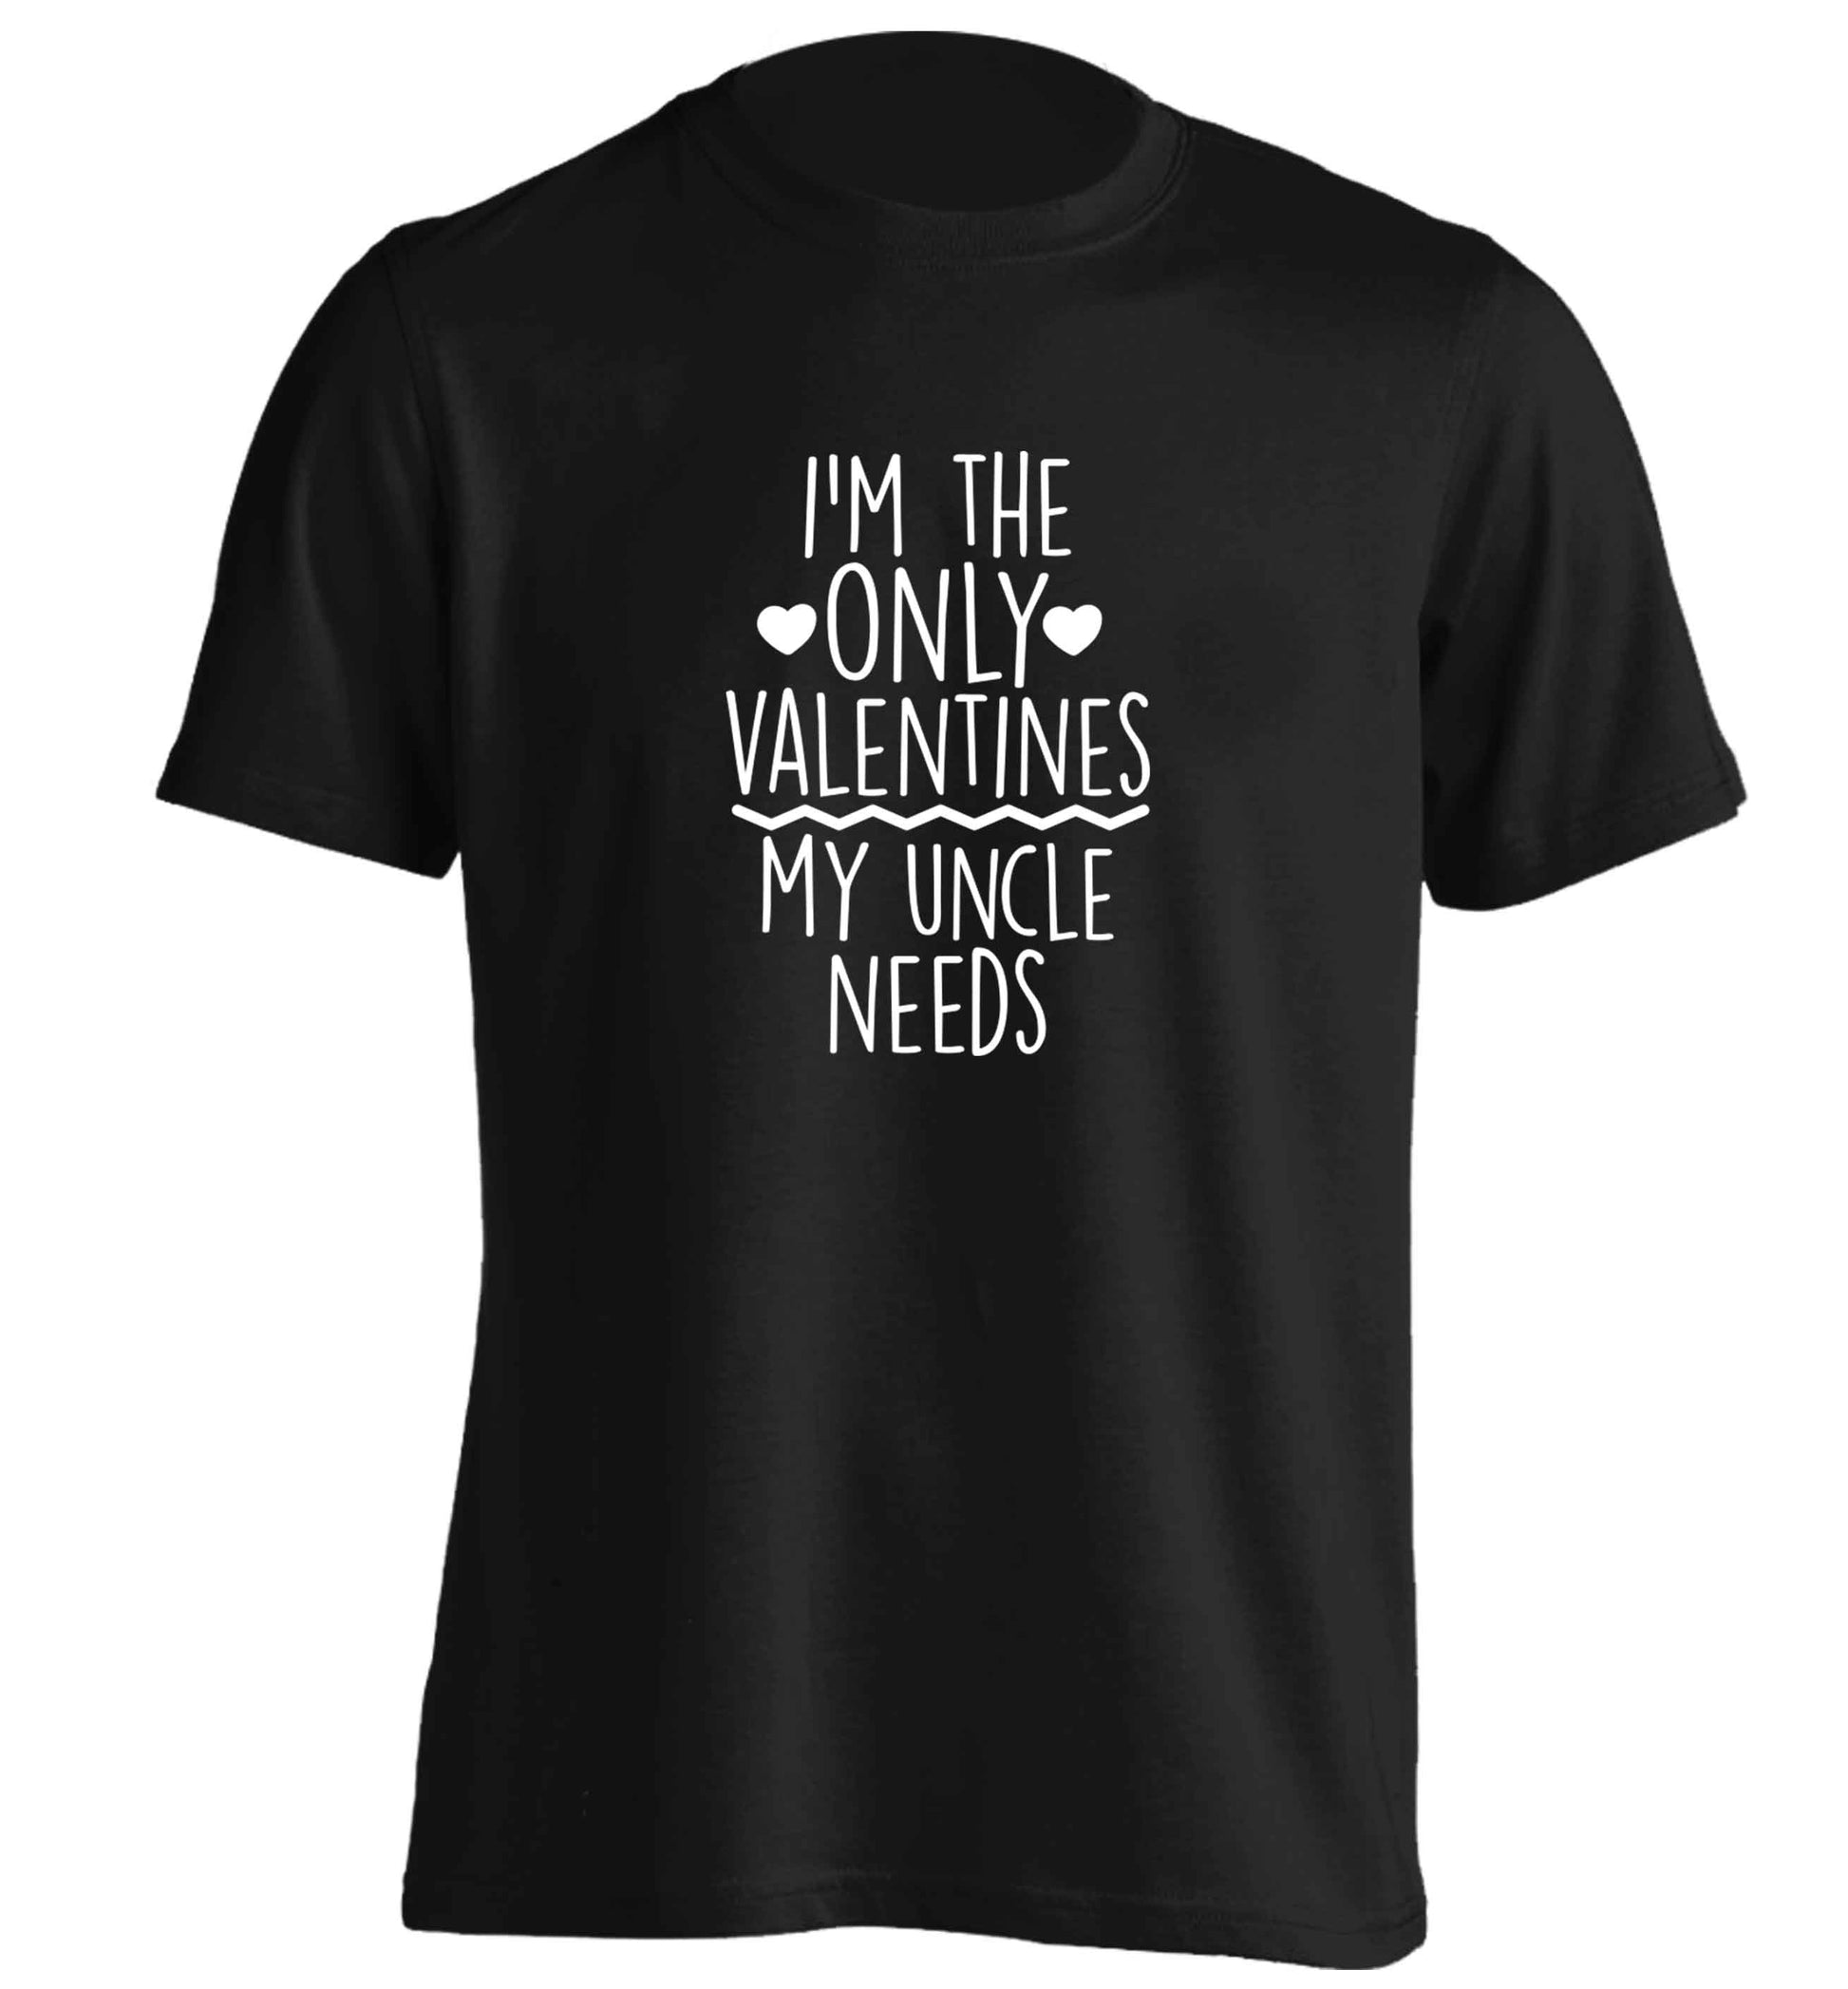 I'm the only valentines my uncle needs adults unisex black Tshirt 2XL